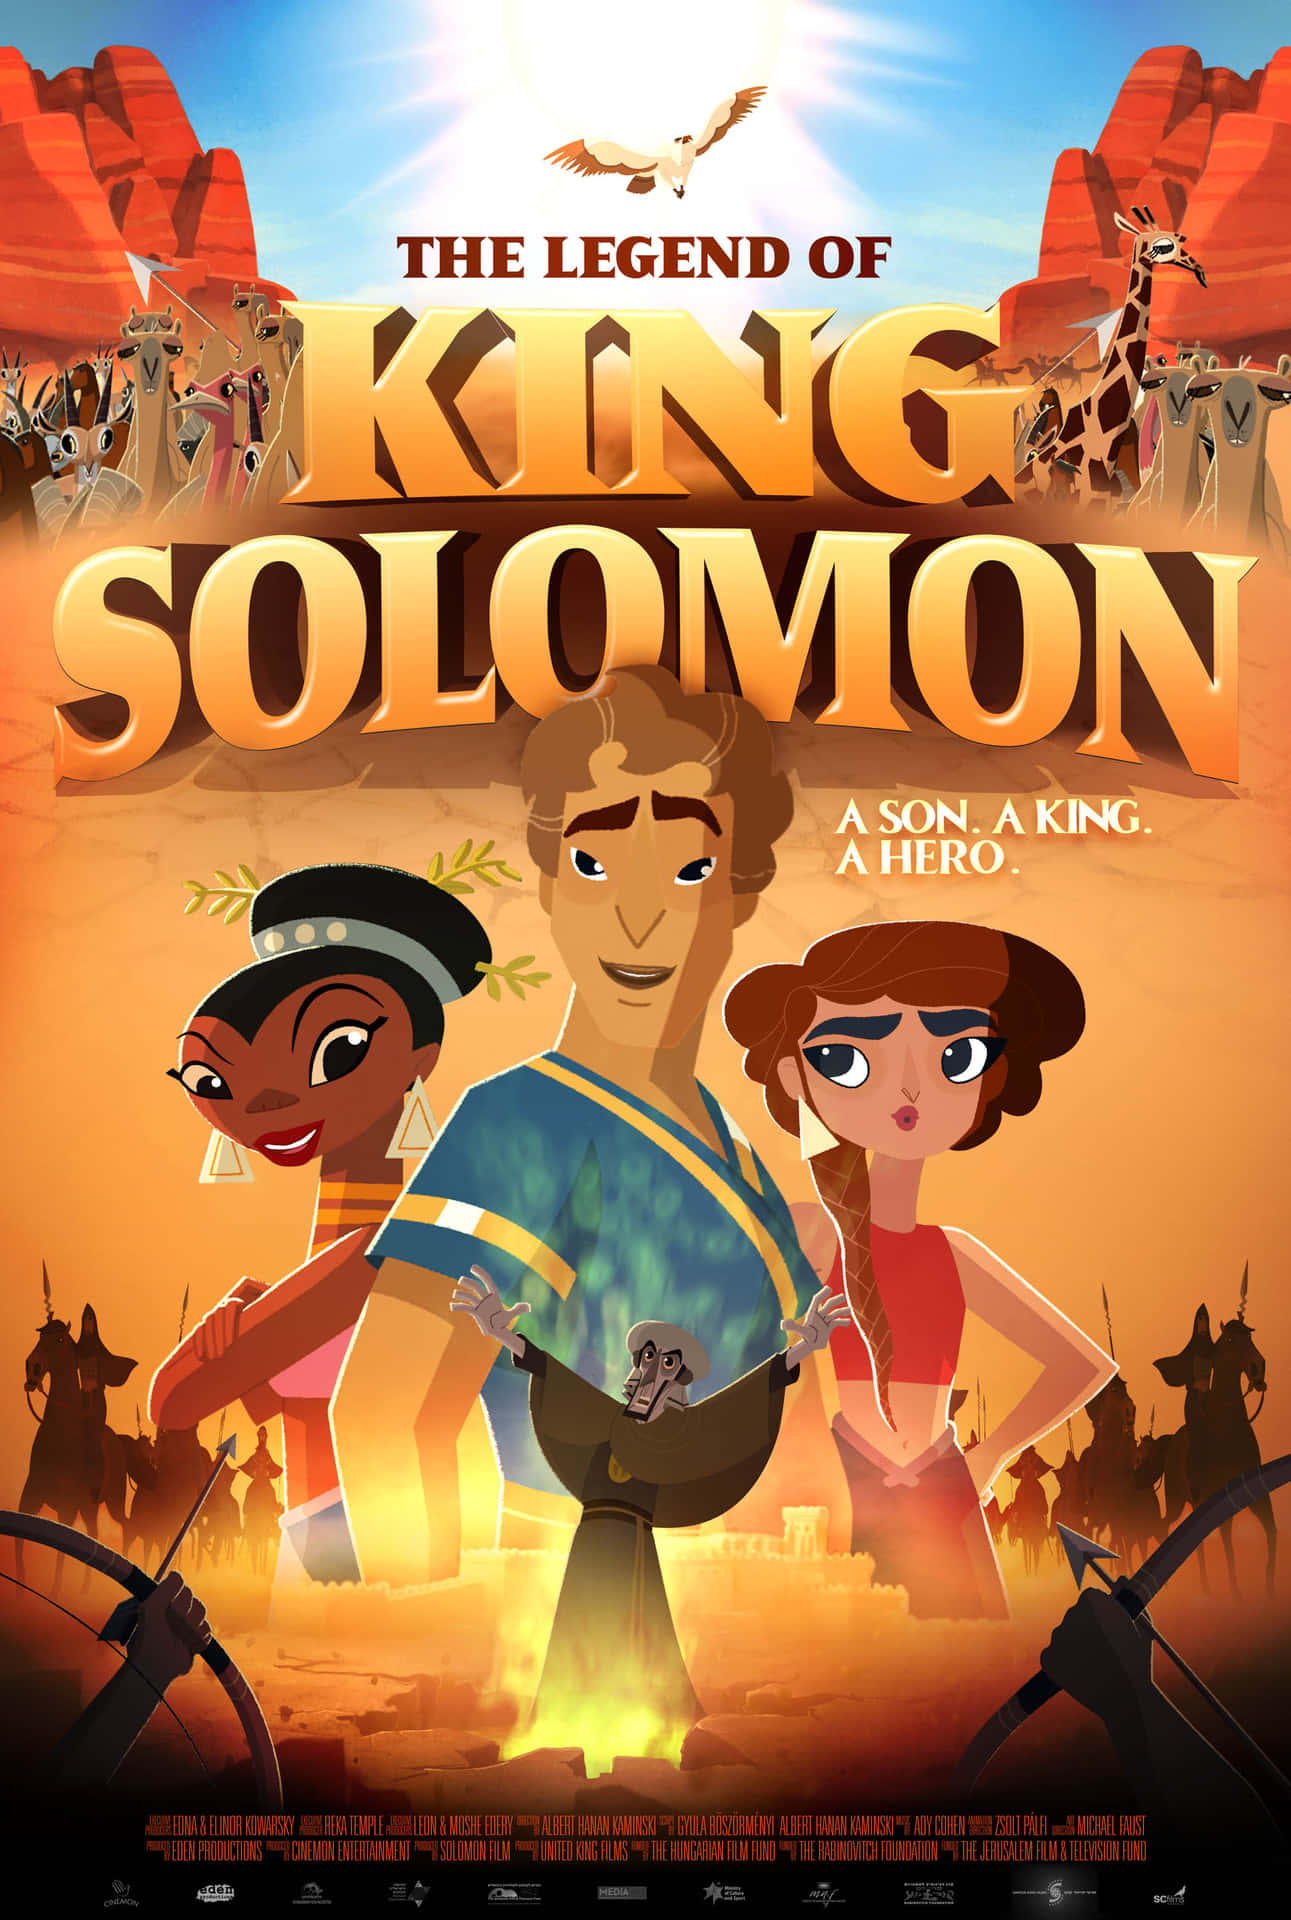 King Solomon, the wisest king in the world who was known for his wisdom, justice and wealth